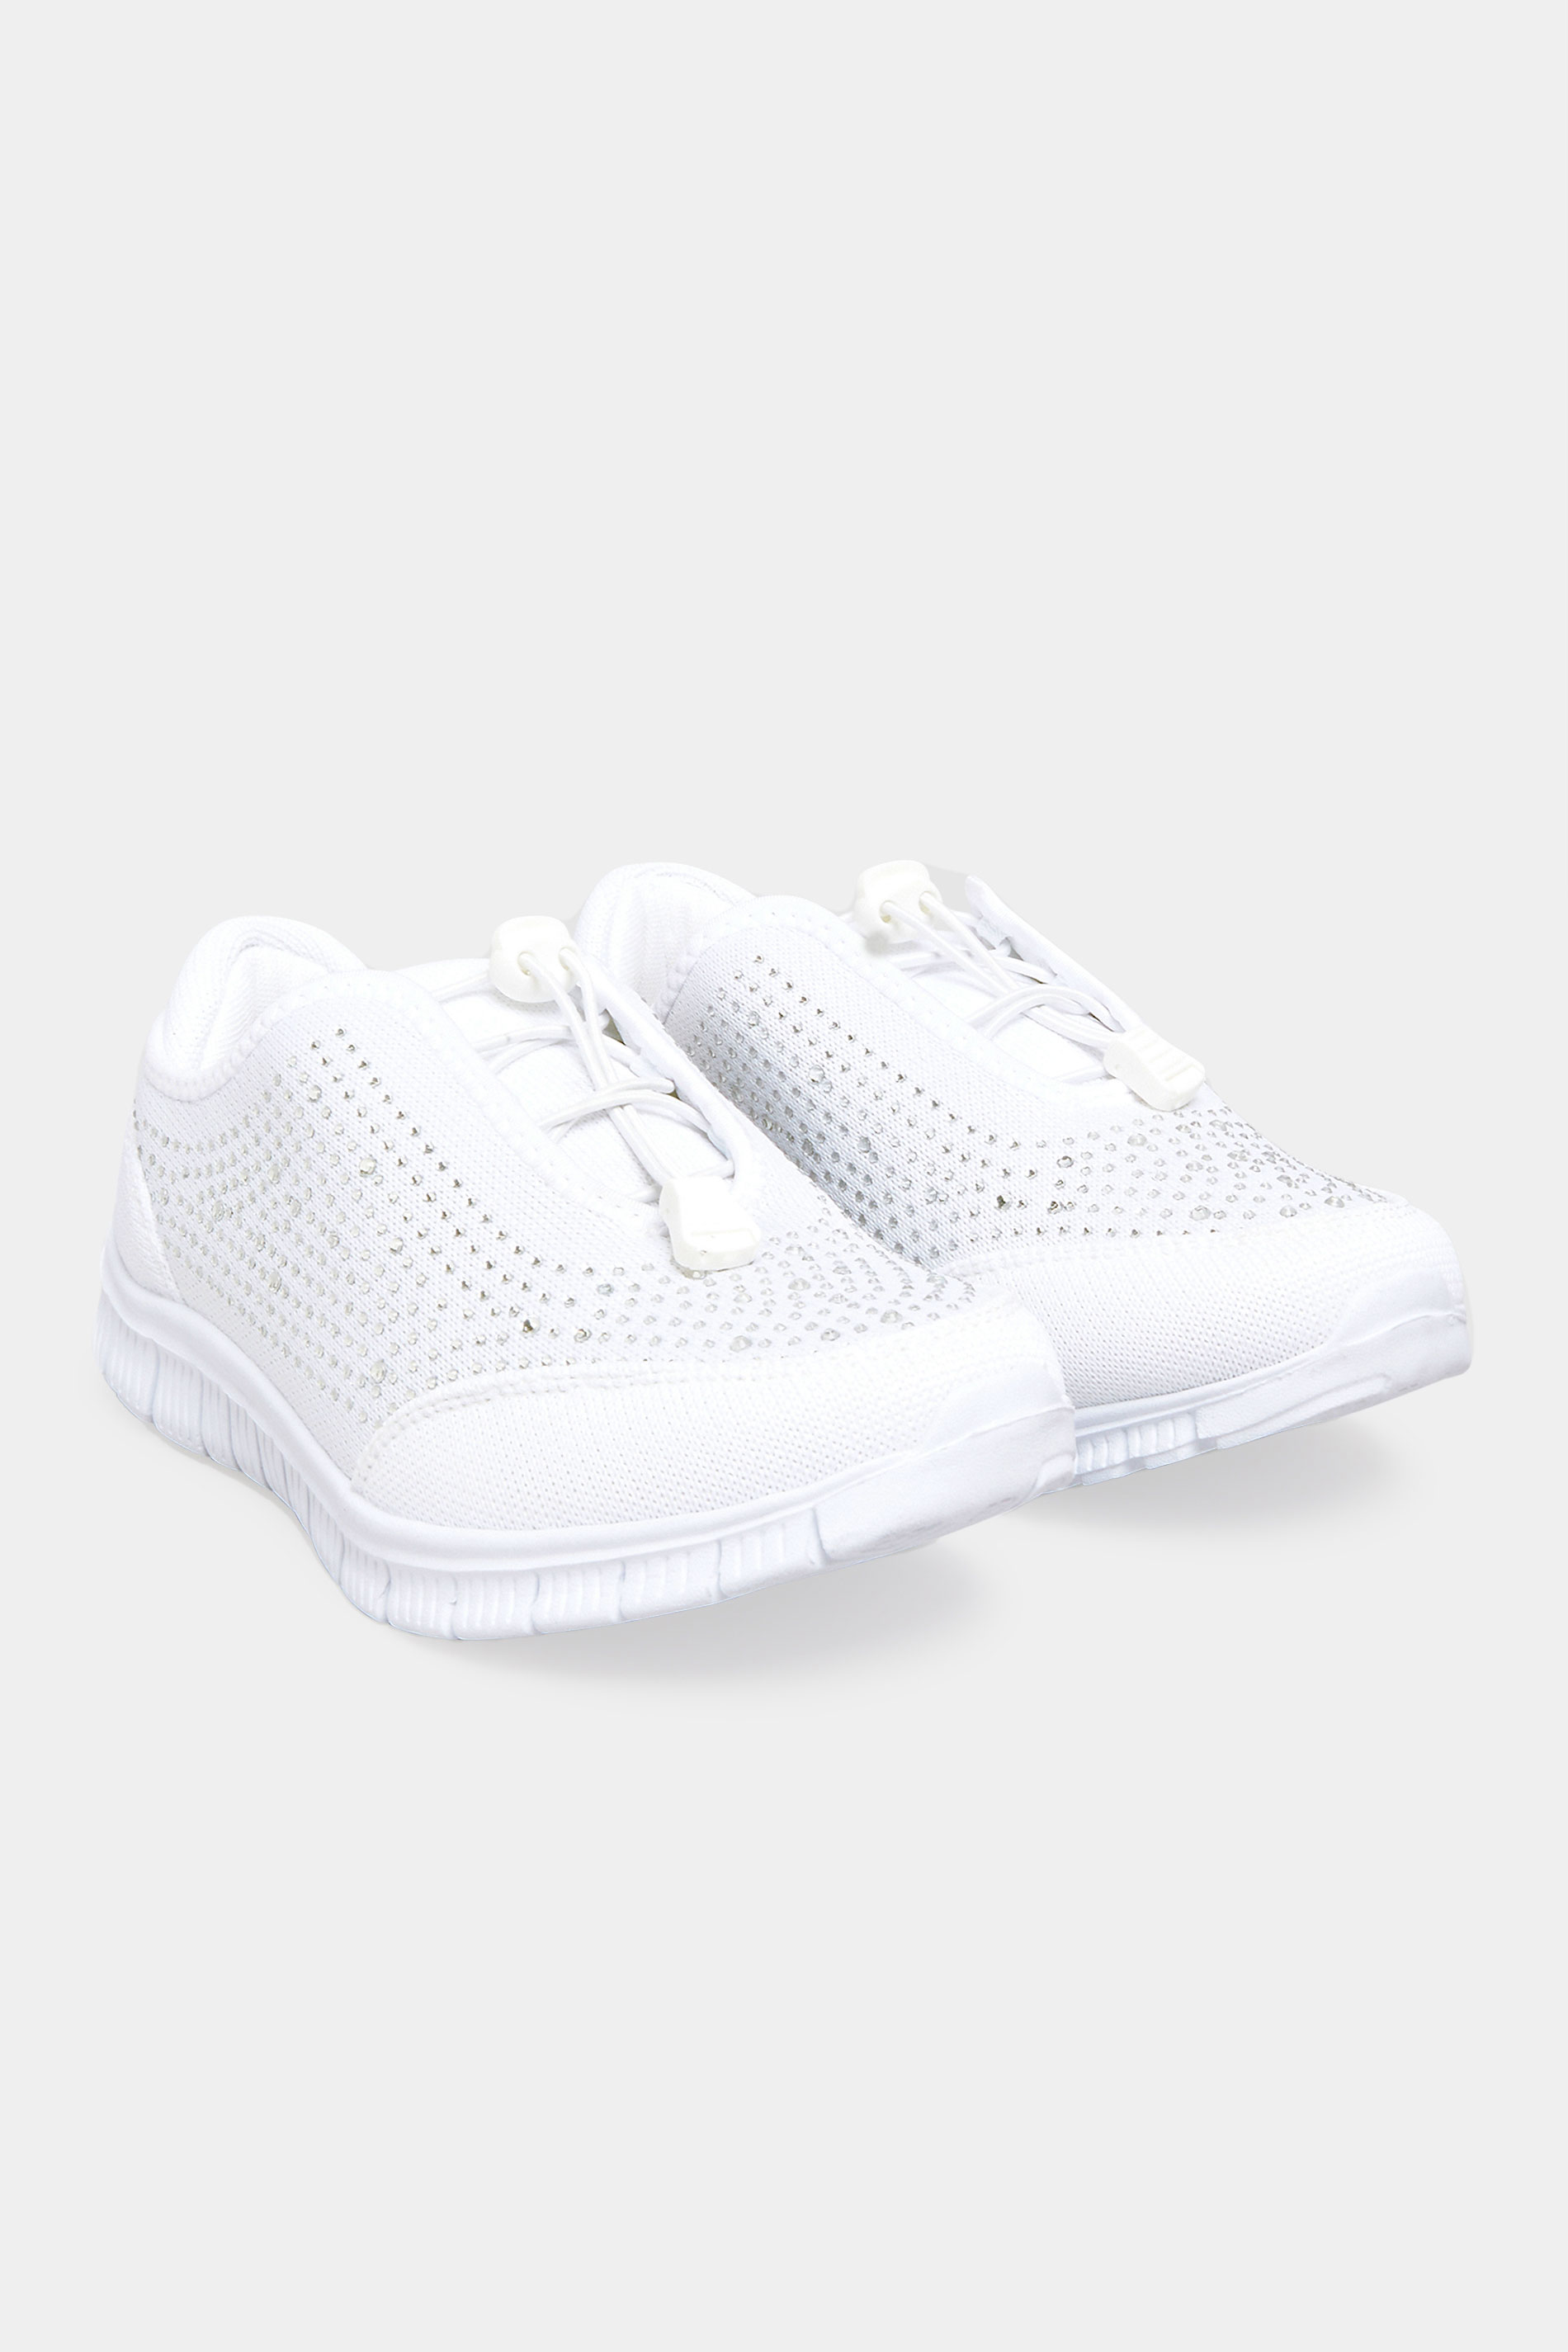 Chaussures Pieds Larges Tennis & Baskets Pieds Larges | Baskets Blanches Empiècement Strass Pieds Larges EEE - SK60595